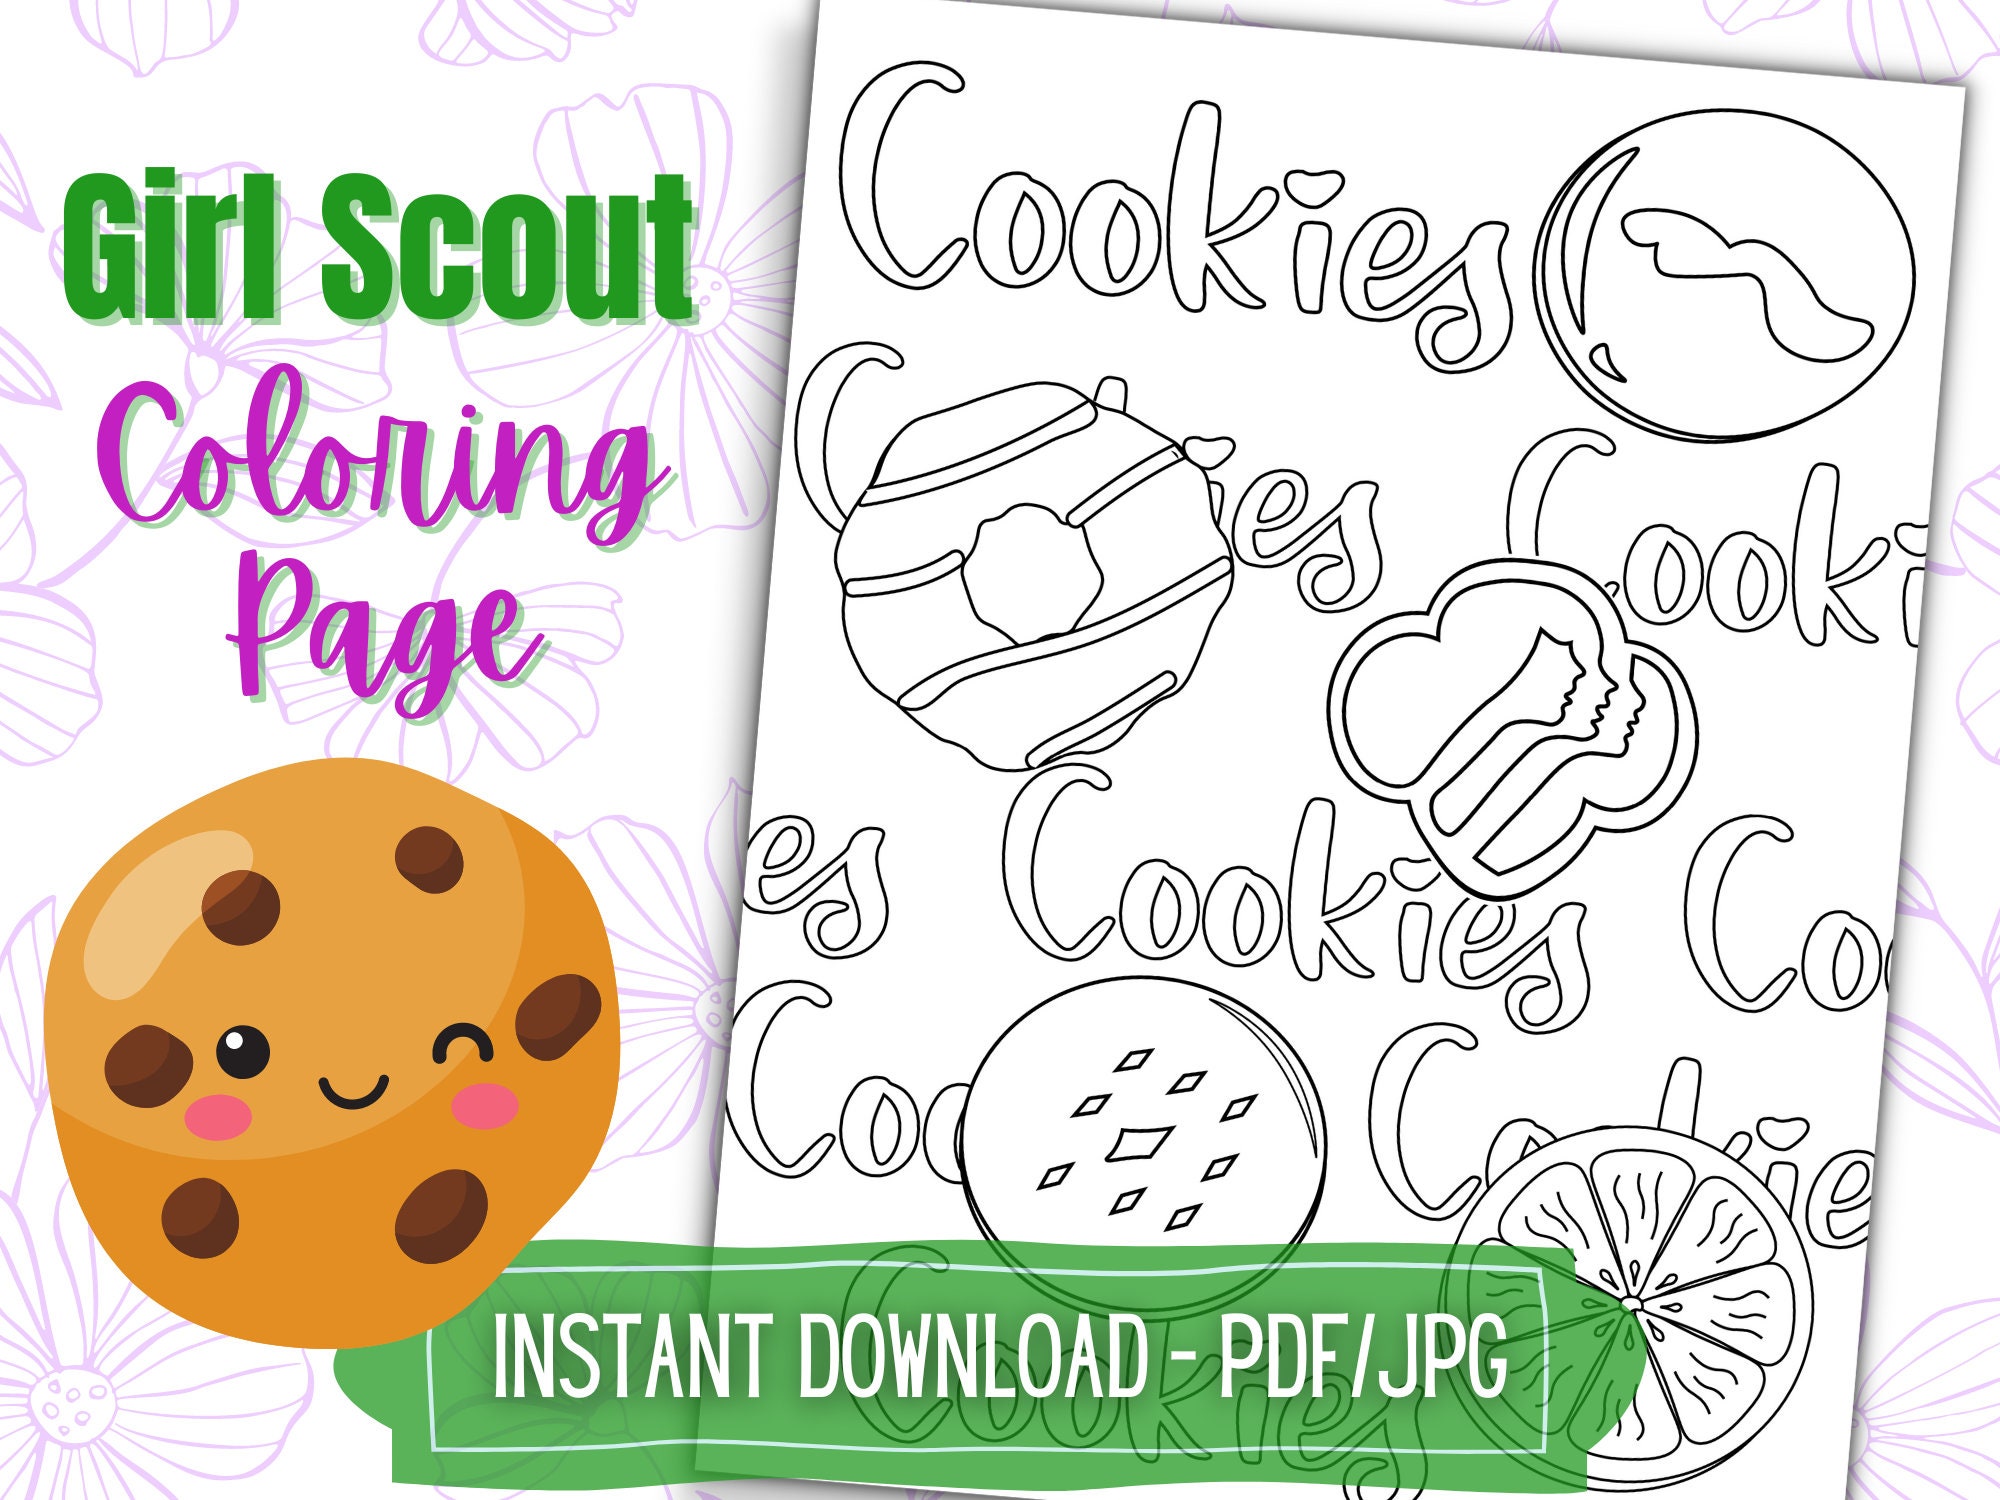 Girl scout coloring page printable coloring pages for daisy brownie junior girl scouts digital download girl scout cookie download now